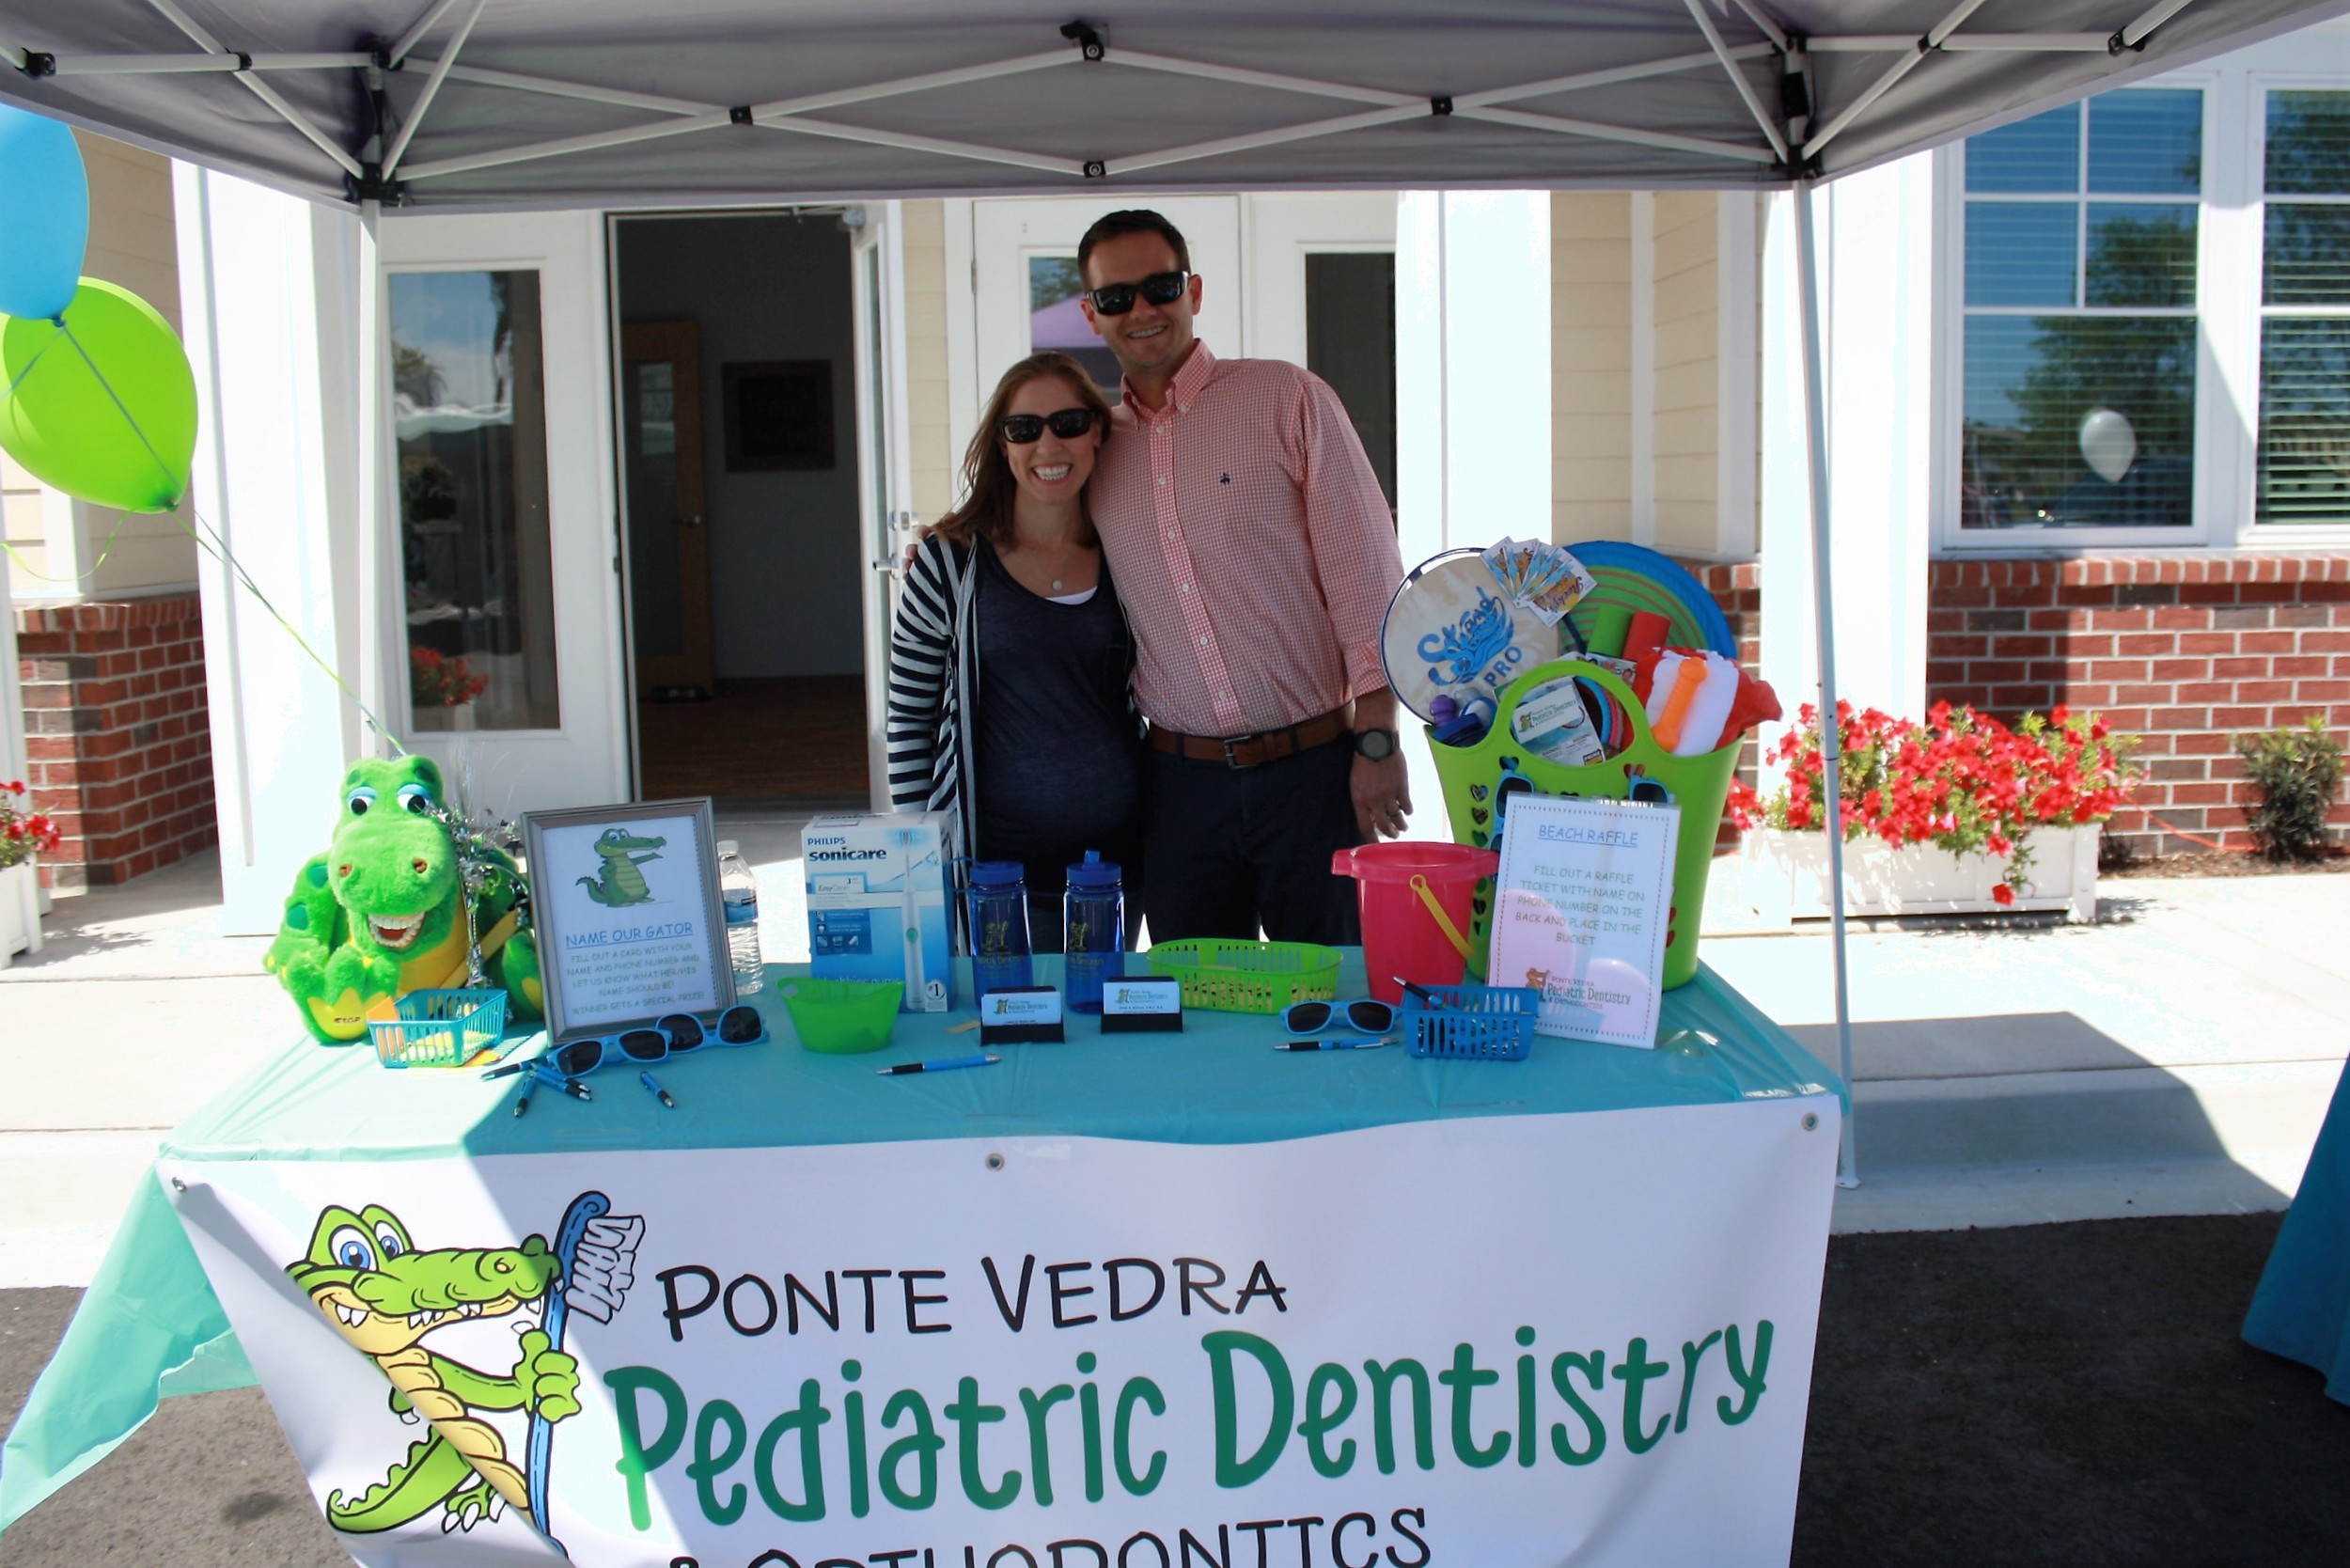 Dr. Lindsay Maples and Dr. Derek Hoffman welcome guests to Ponte Vedra Pediatric Dentistry and Orthodontics at the grand opening celebration of the new Town Plaza offices in Nocatee Town Center. Fun 4 First Coast Kids, Ponte Vedra Plastic Surgery and other businesses joined in the celebration, which featured children’s games and activities, prizes, a Gather 2 Game truck, refreshments and more.